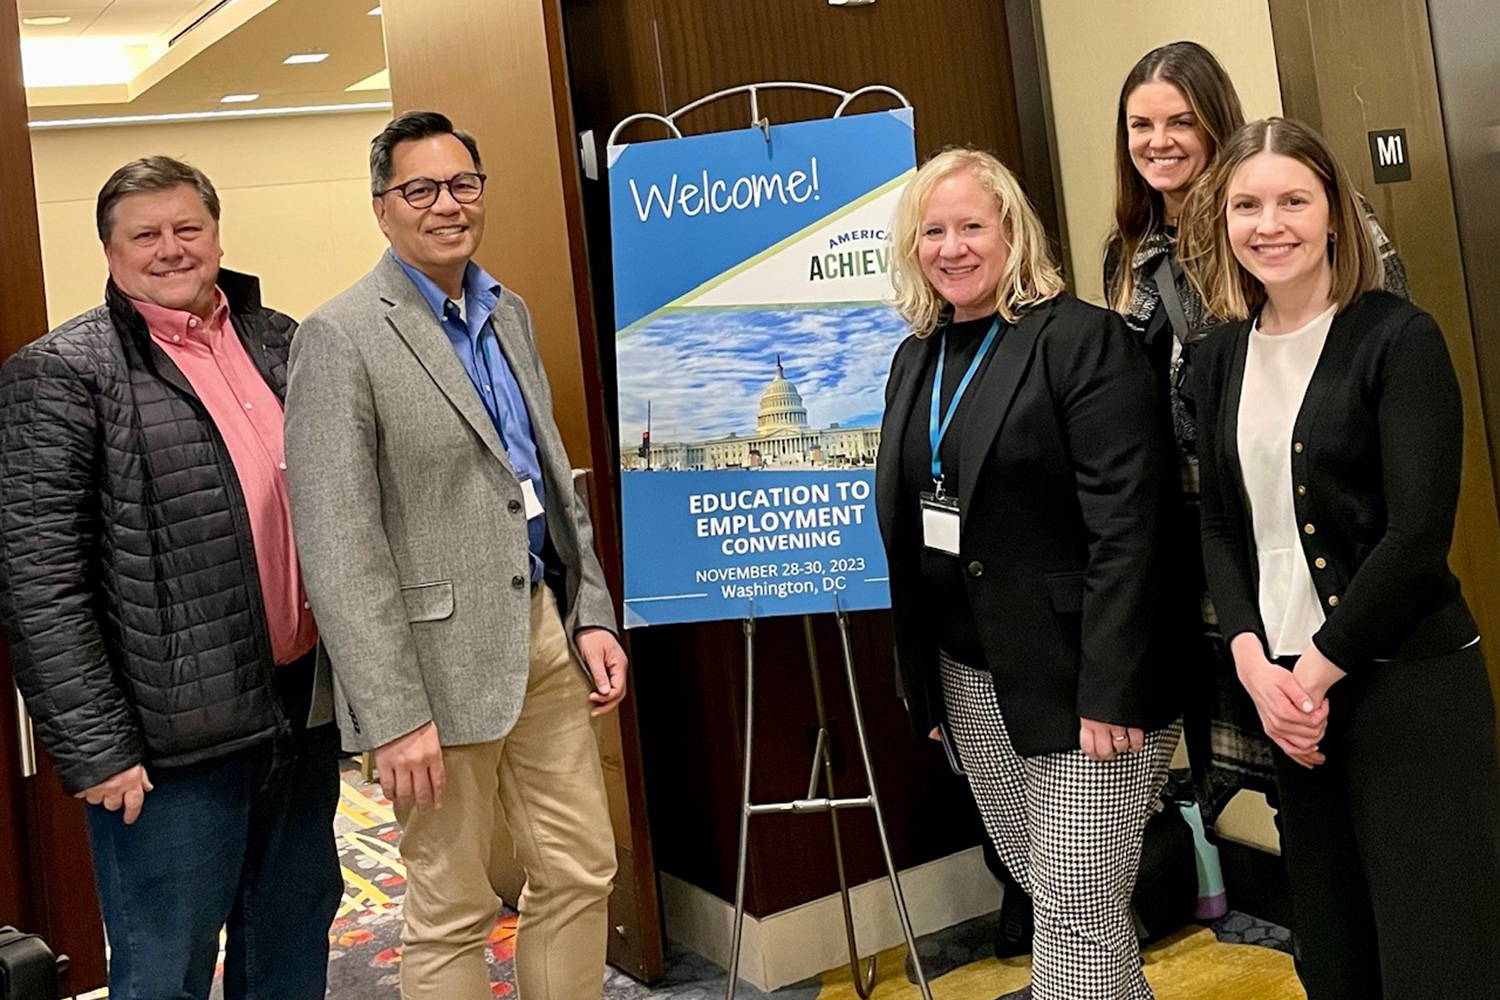 Representatives from GEM Central and the Talent Transformation pillar traveled to Washington D.C. in November 2023 for the America Achieves Education to Employment (E2E) intensive.